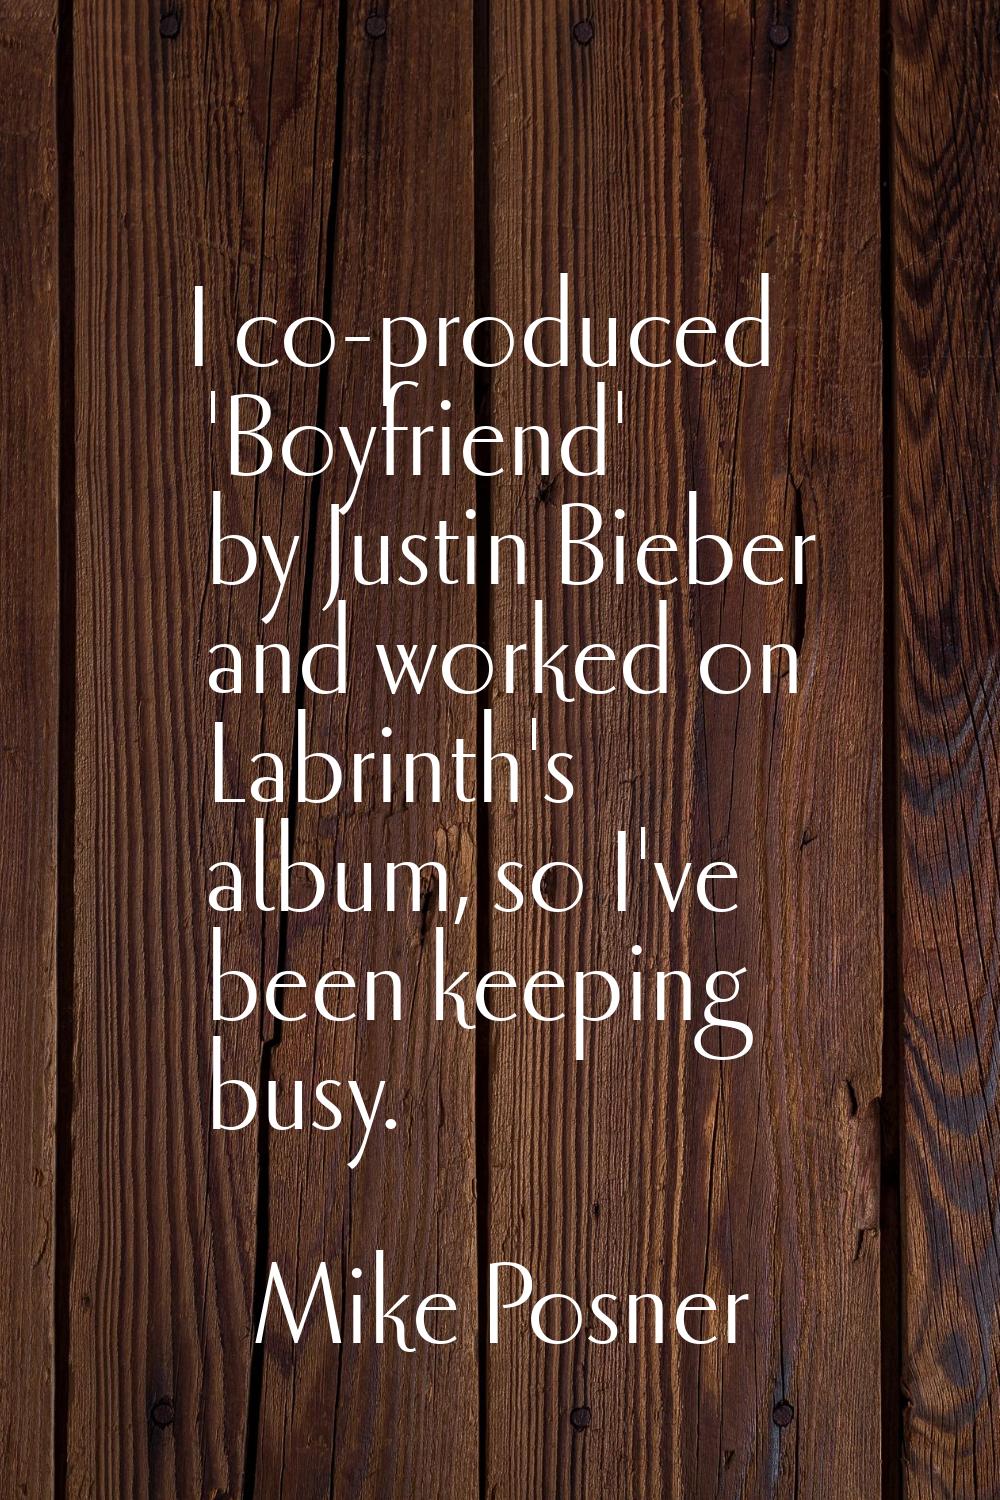 I co-produced 'Boyfriend' by Justin Bieber and worked on Labrinth's album, so I've been keeping bus